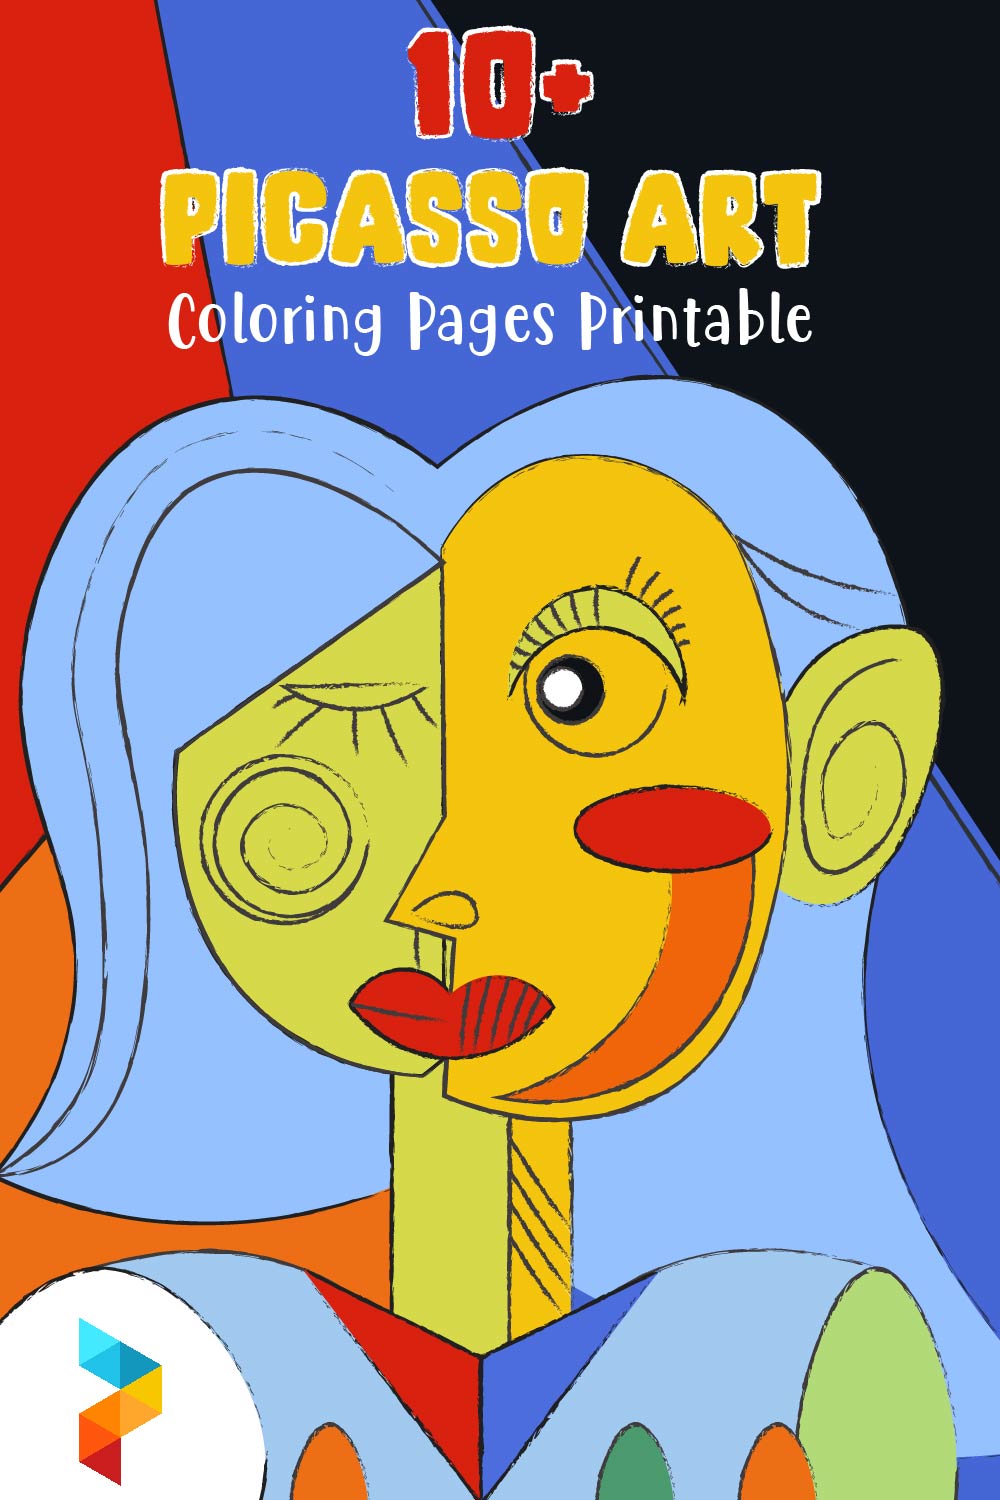 Picasso Art Coloring Pages